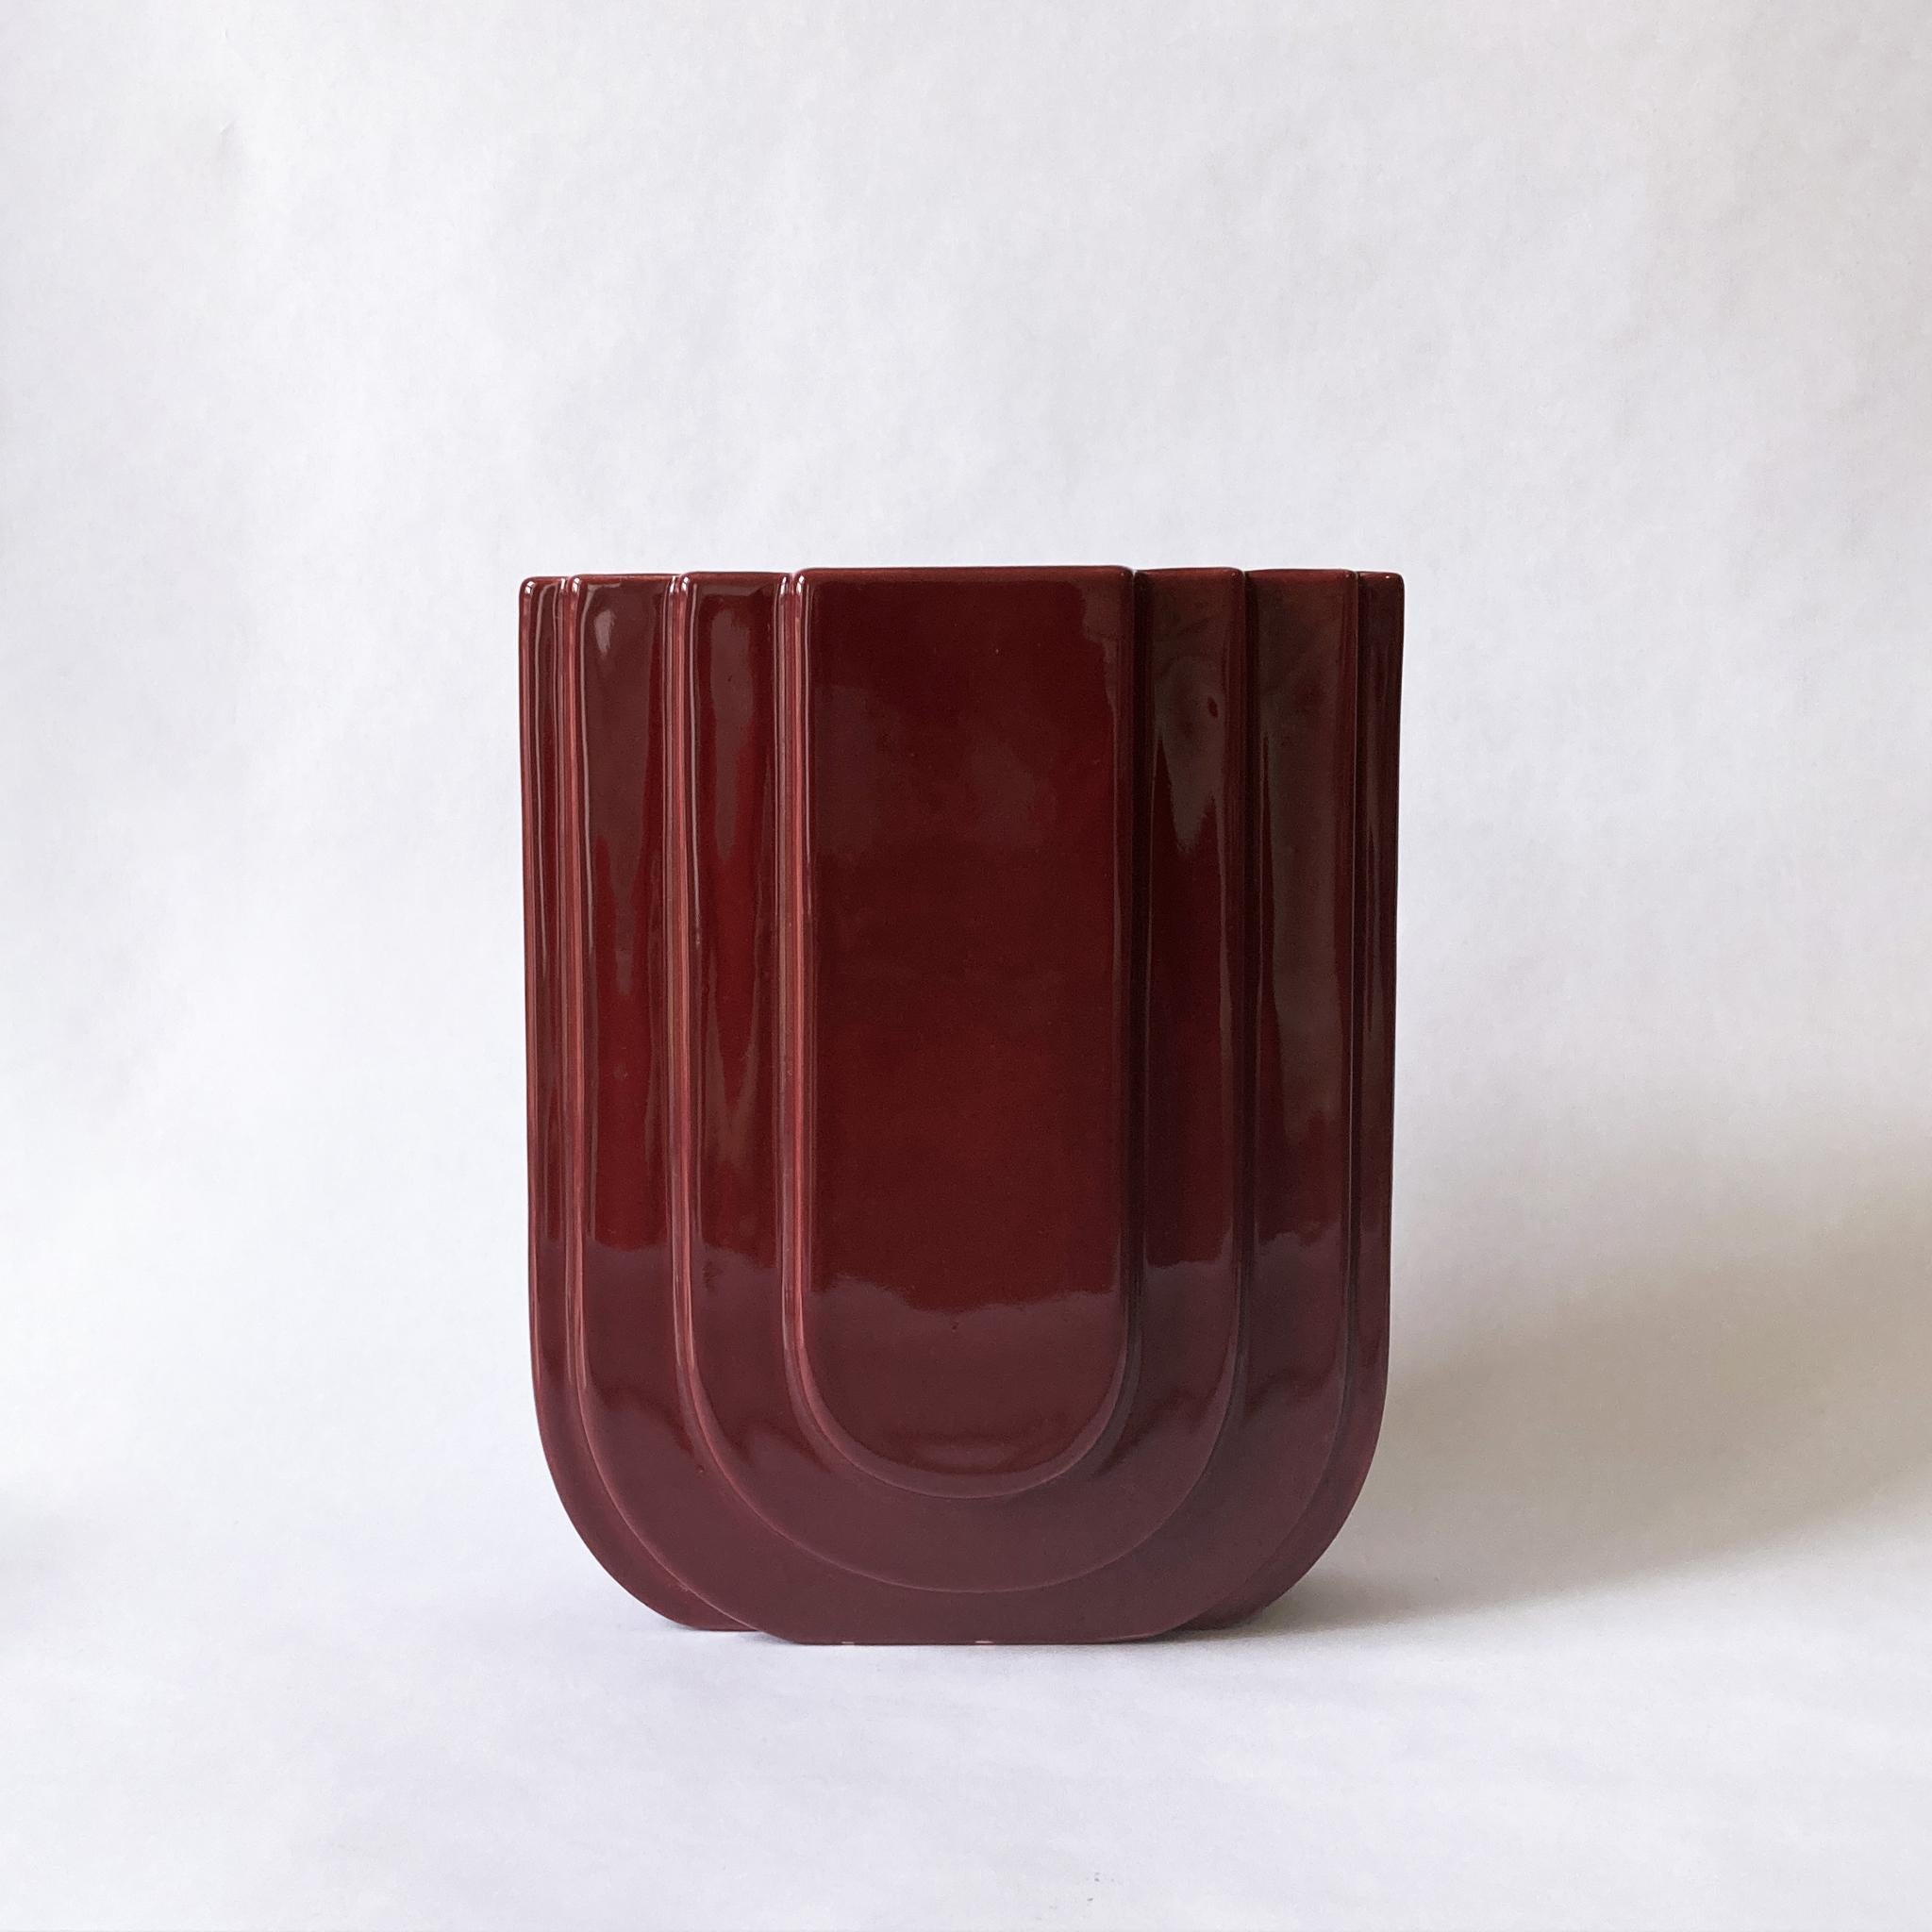 Art Deco style Royal Haeger burgundy/ wine vase, medium size. In great condition, no crazing, chips or cracks. Beautiful on its own, or paired with tonal pieces to form a group. See condition details noted. Measures: H 8.25